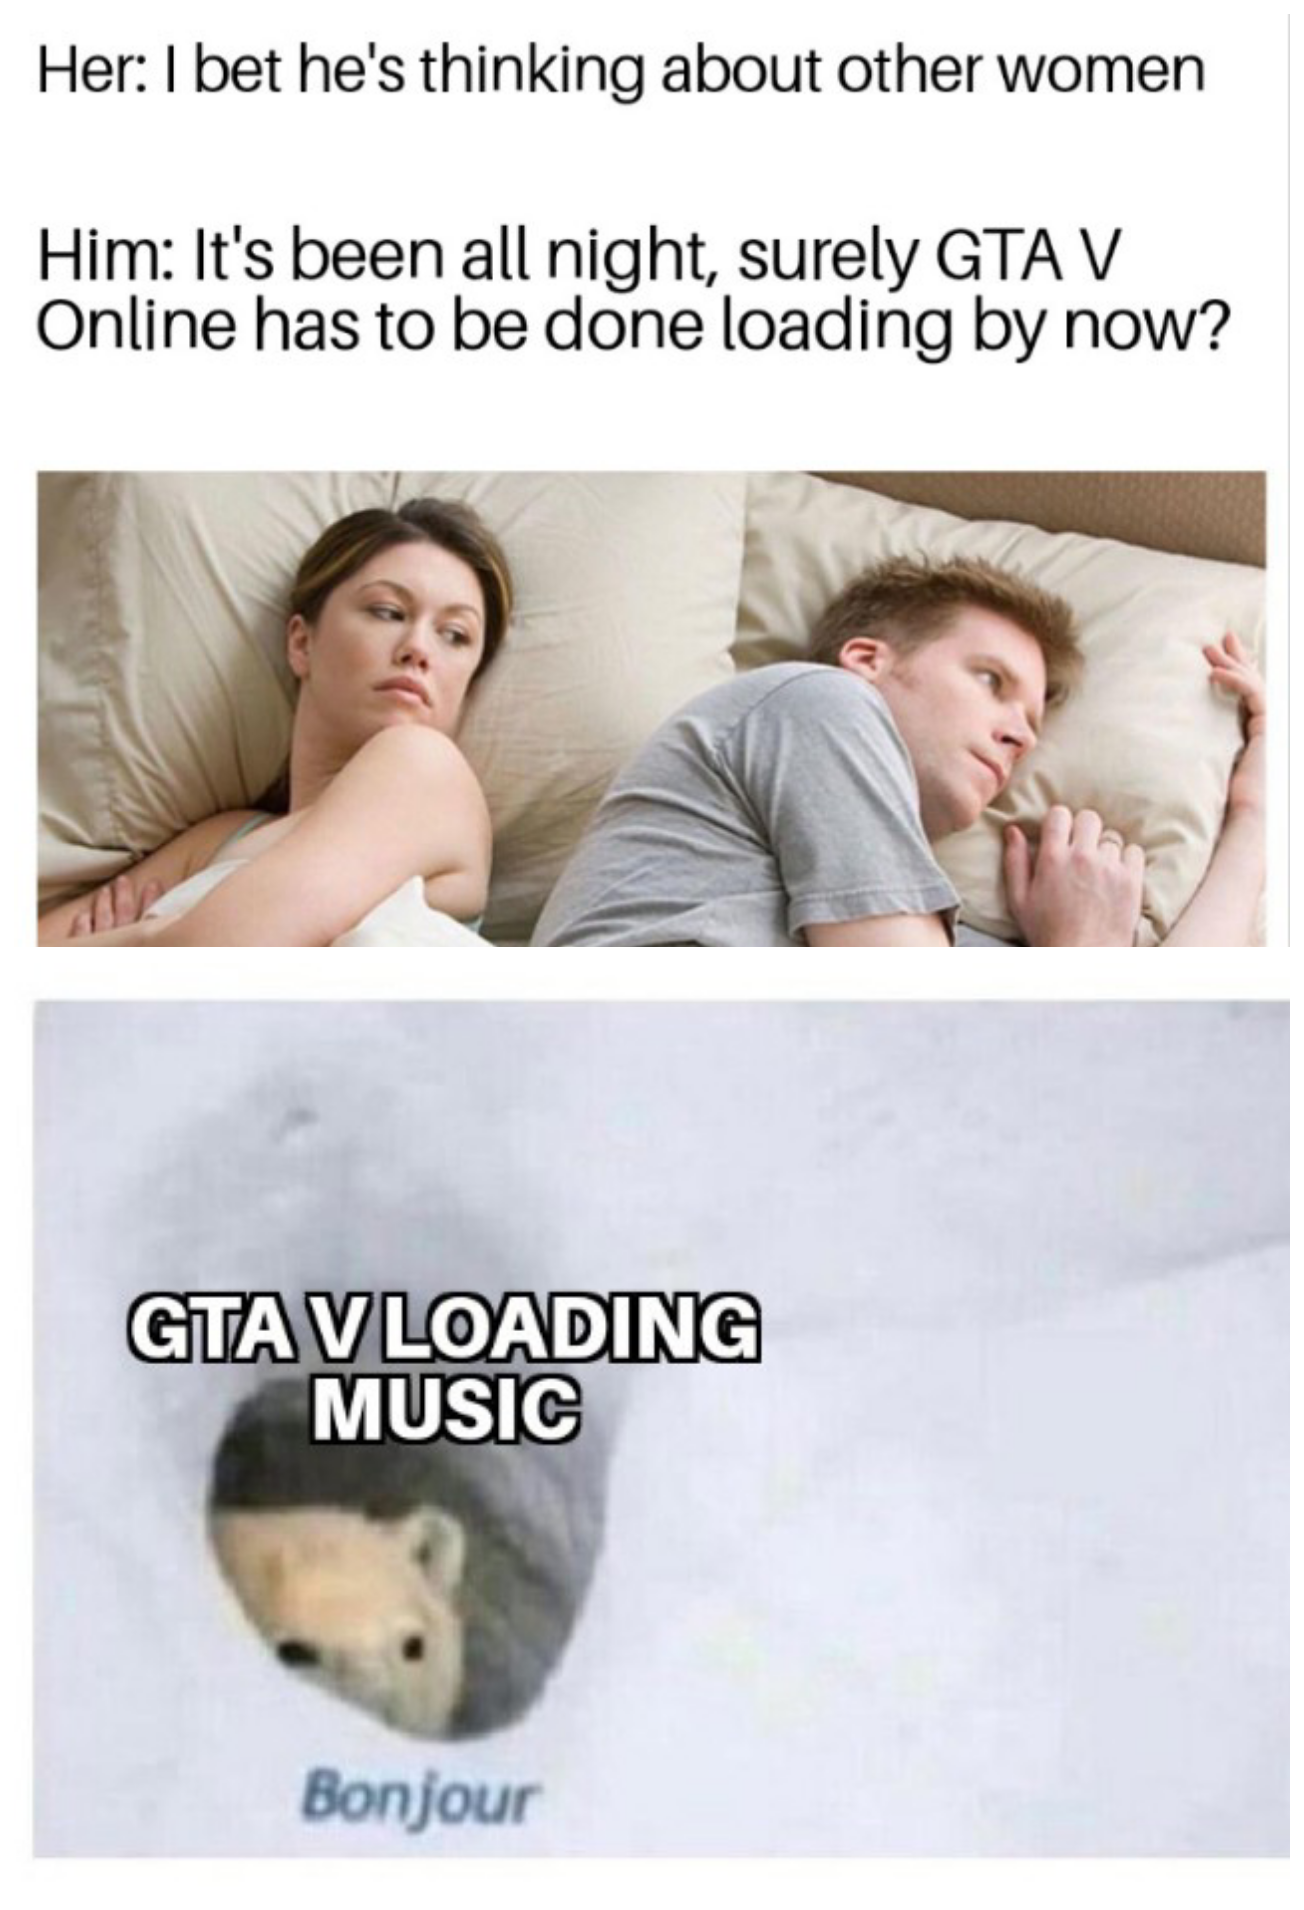 funny gaming memes - Her I bet he's thinking about other women Him It's been all night, surely Gta V Online has to be done loading by now? Gta Vloading Music Bonjour